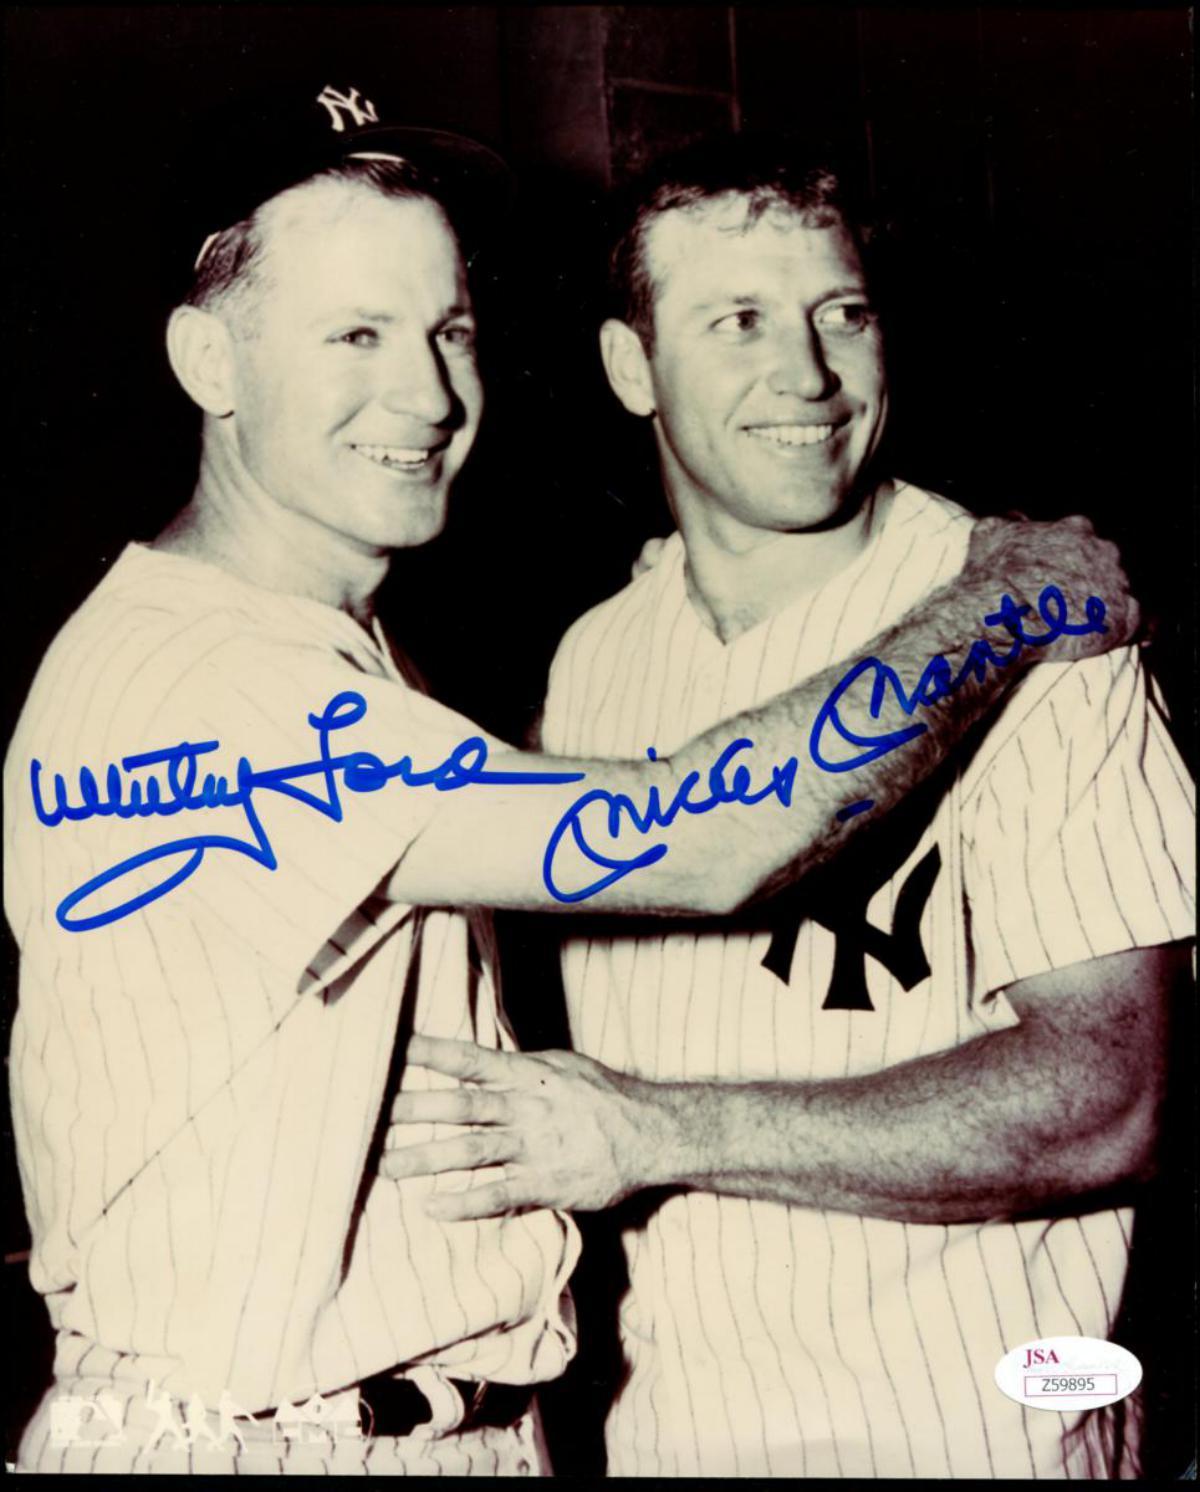 Whitey Ford and Mickey Mantle Photo Signed